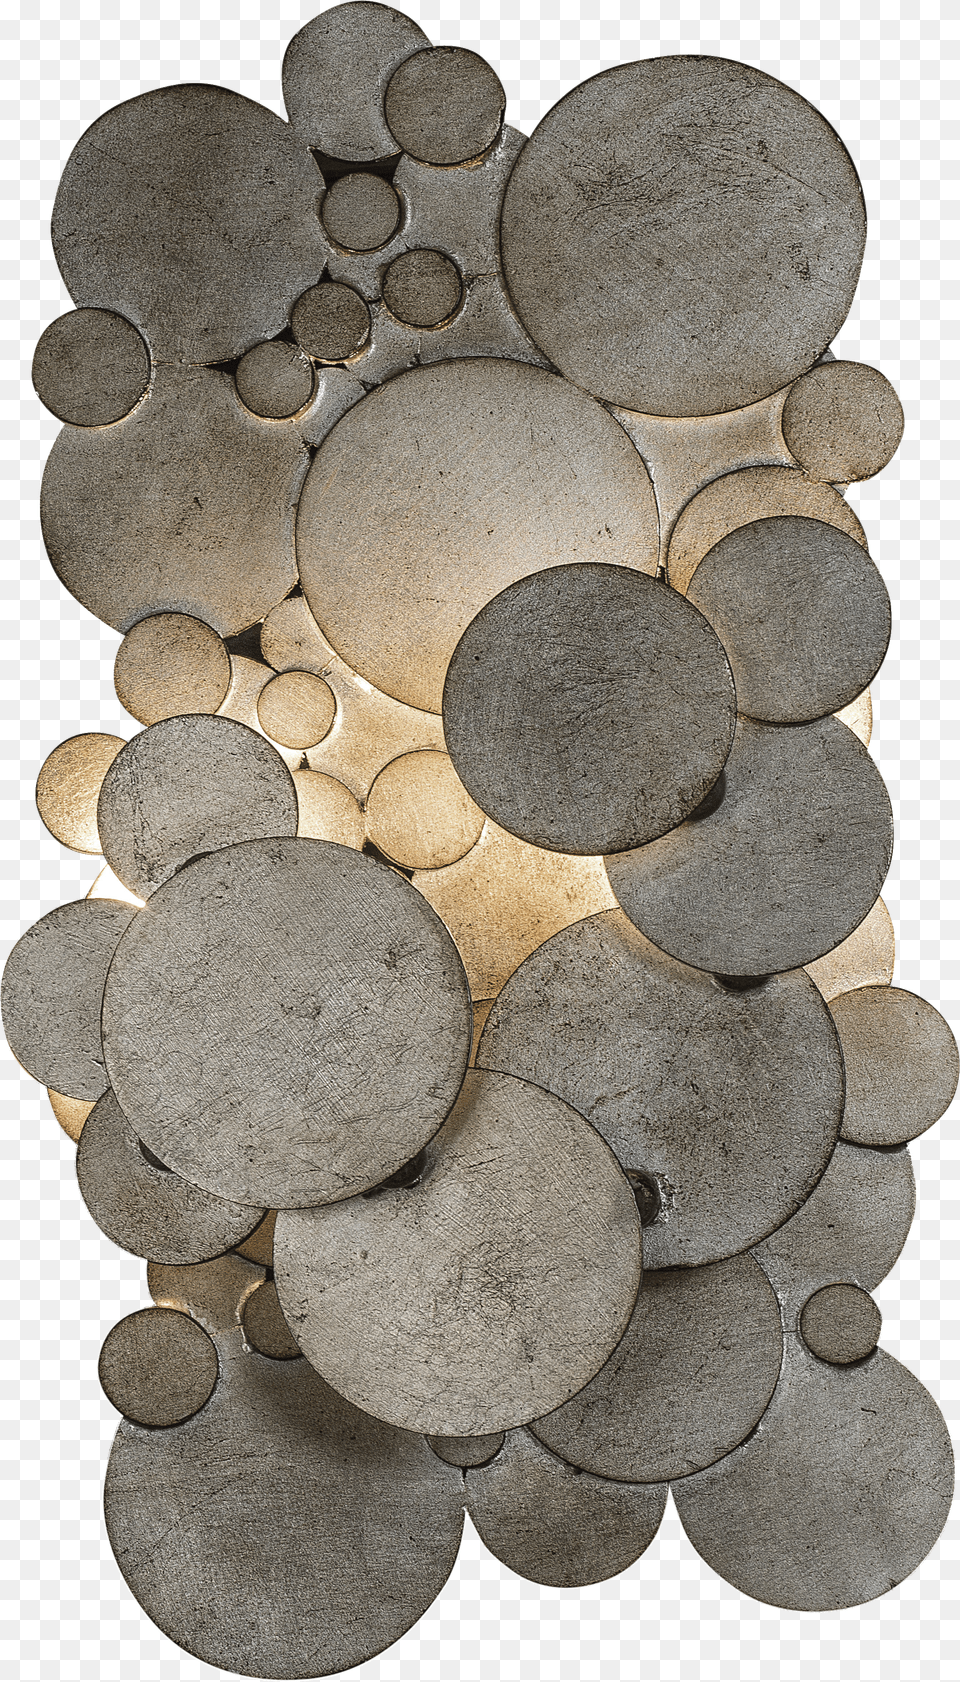 Tree Bark Texture Png Image